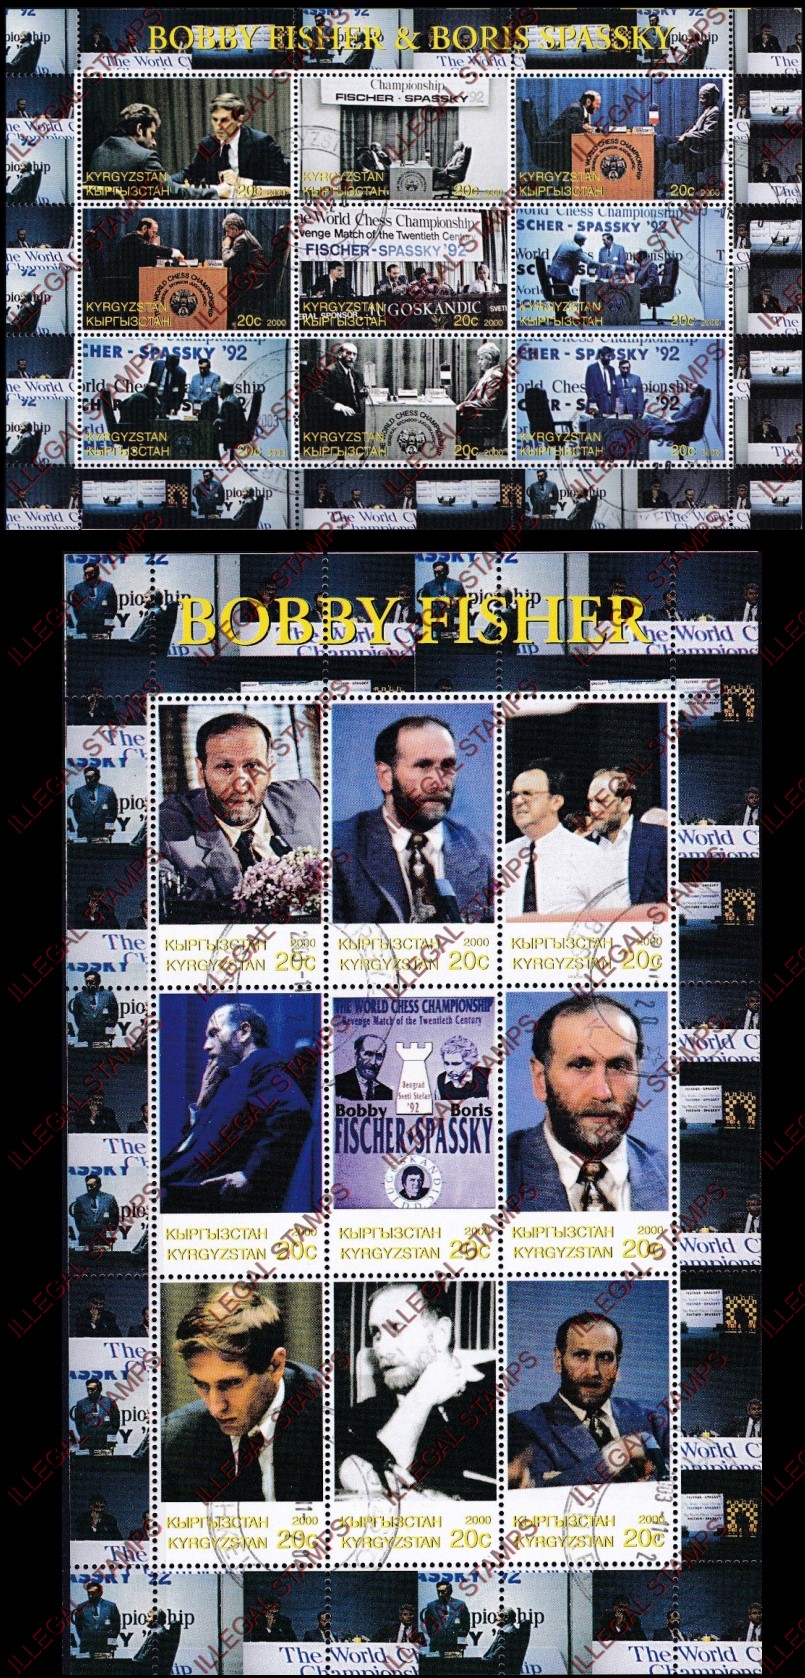 Kyrgyzstan 2000 Chess Bobby Fisher Illegal Stamp Sheetlets (Group 4)